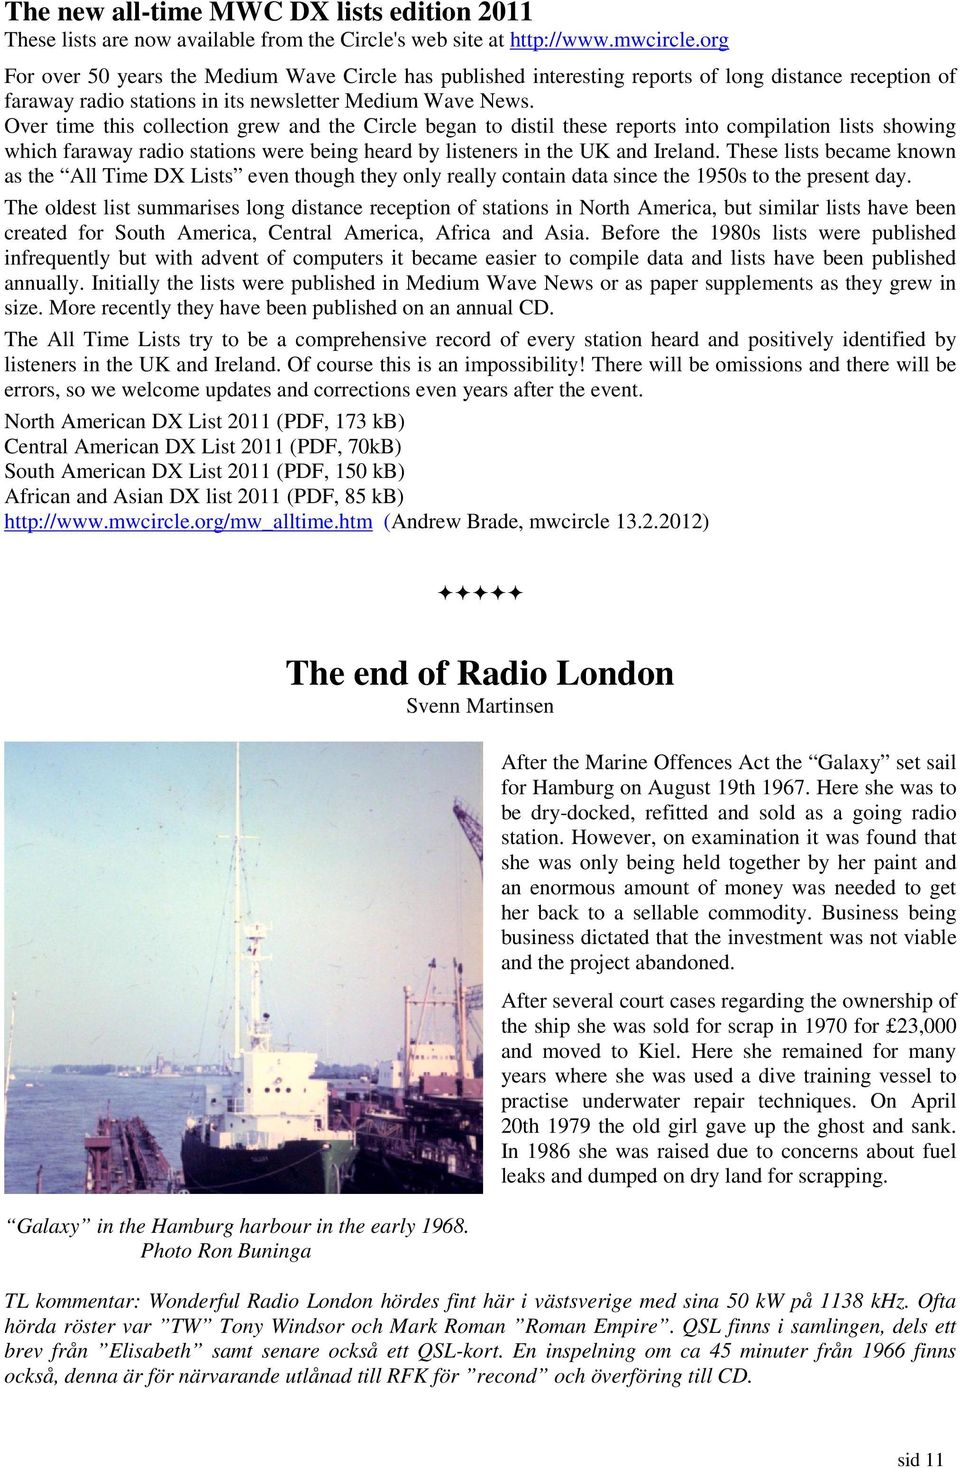 Over time this collection grew and the Circle began to distil these reports into compilation lists showing which faraway radio stations were being heard by listeners in the UK and Ireland.